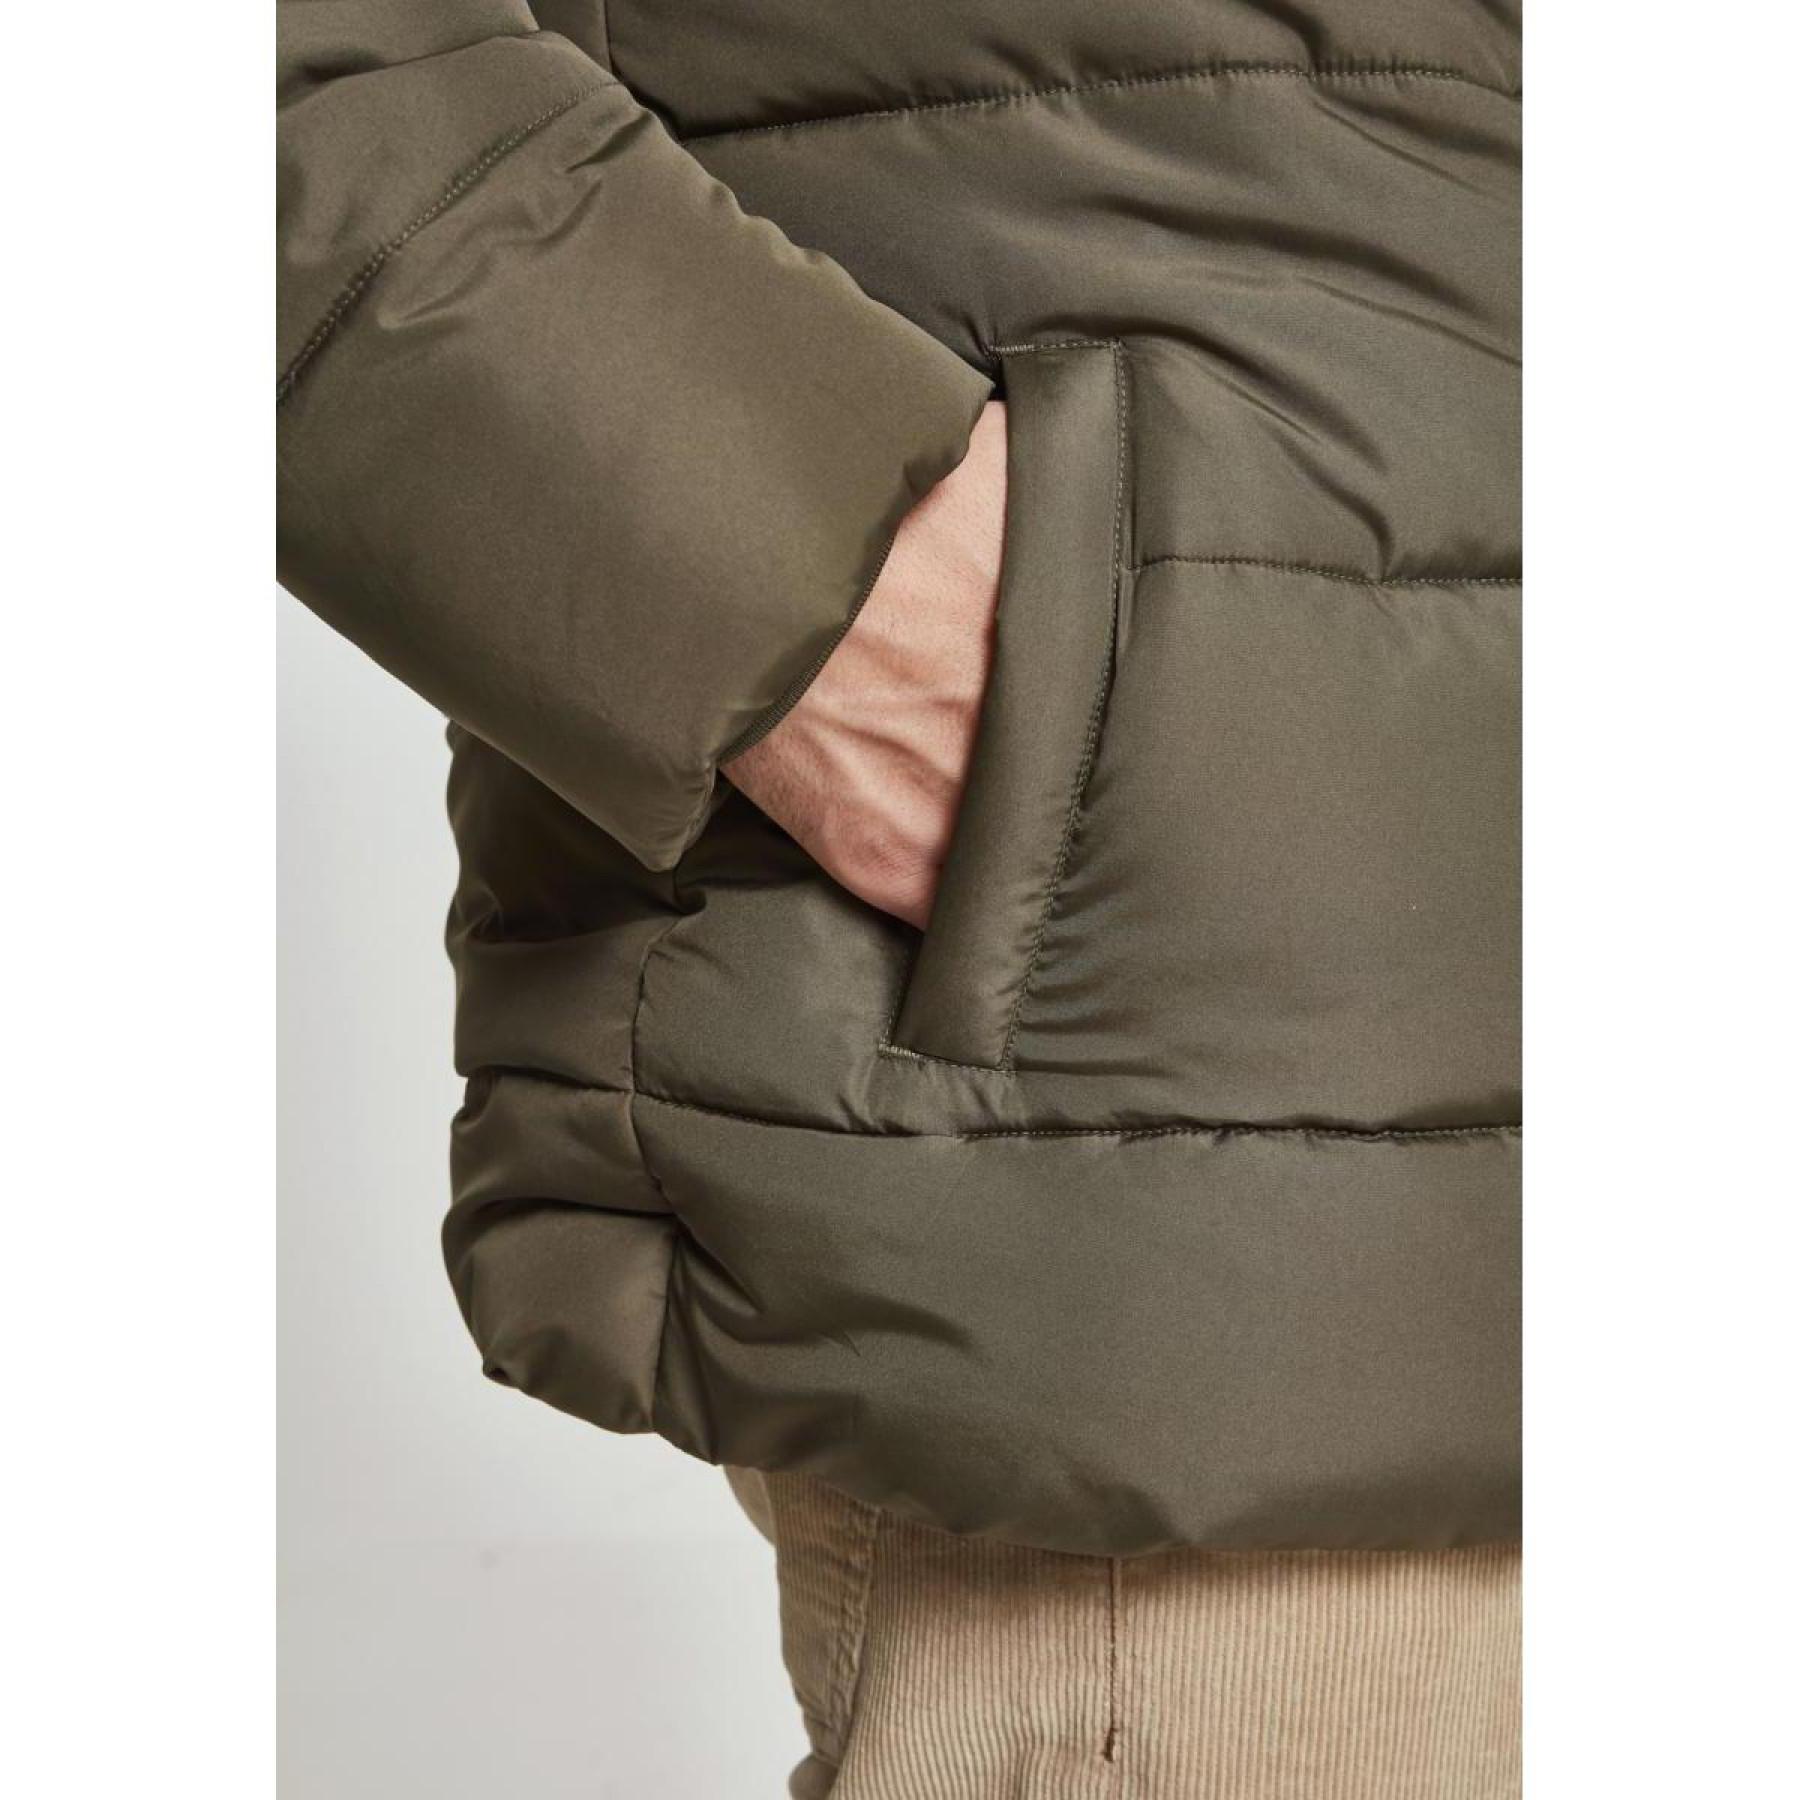 Parka Urban Classic pull over